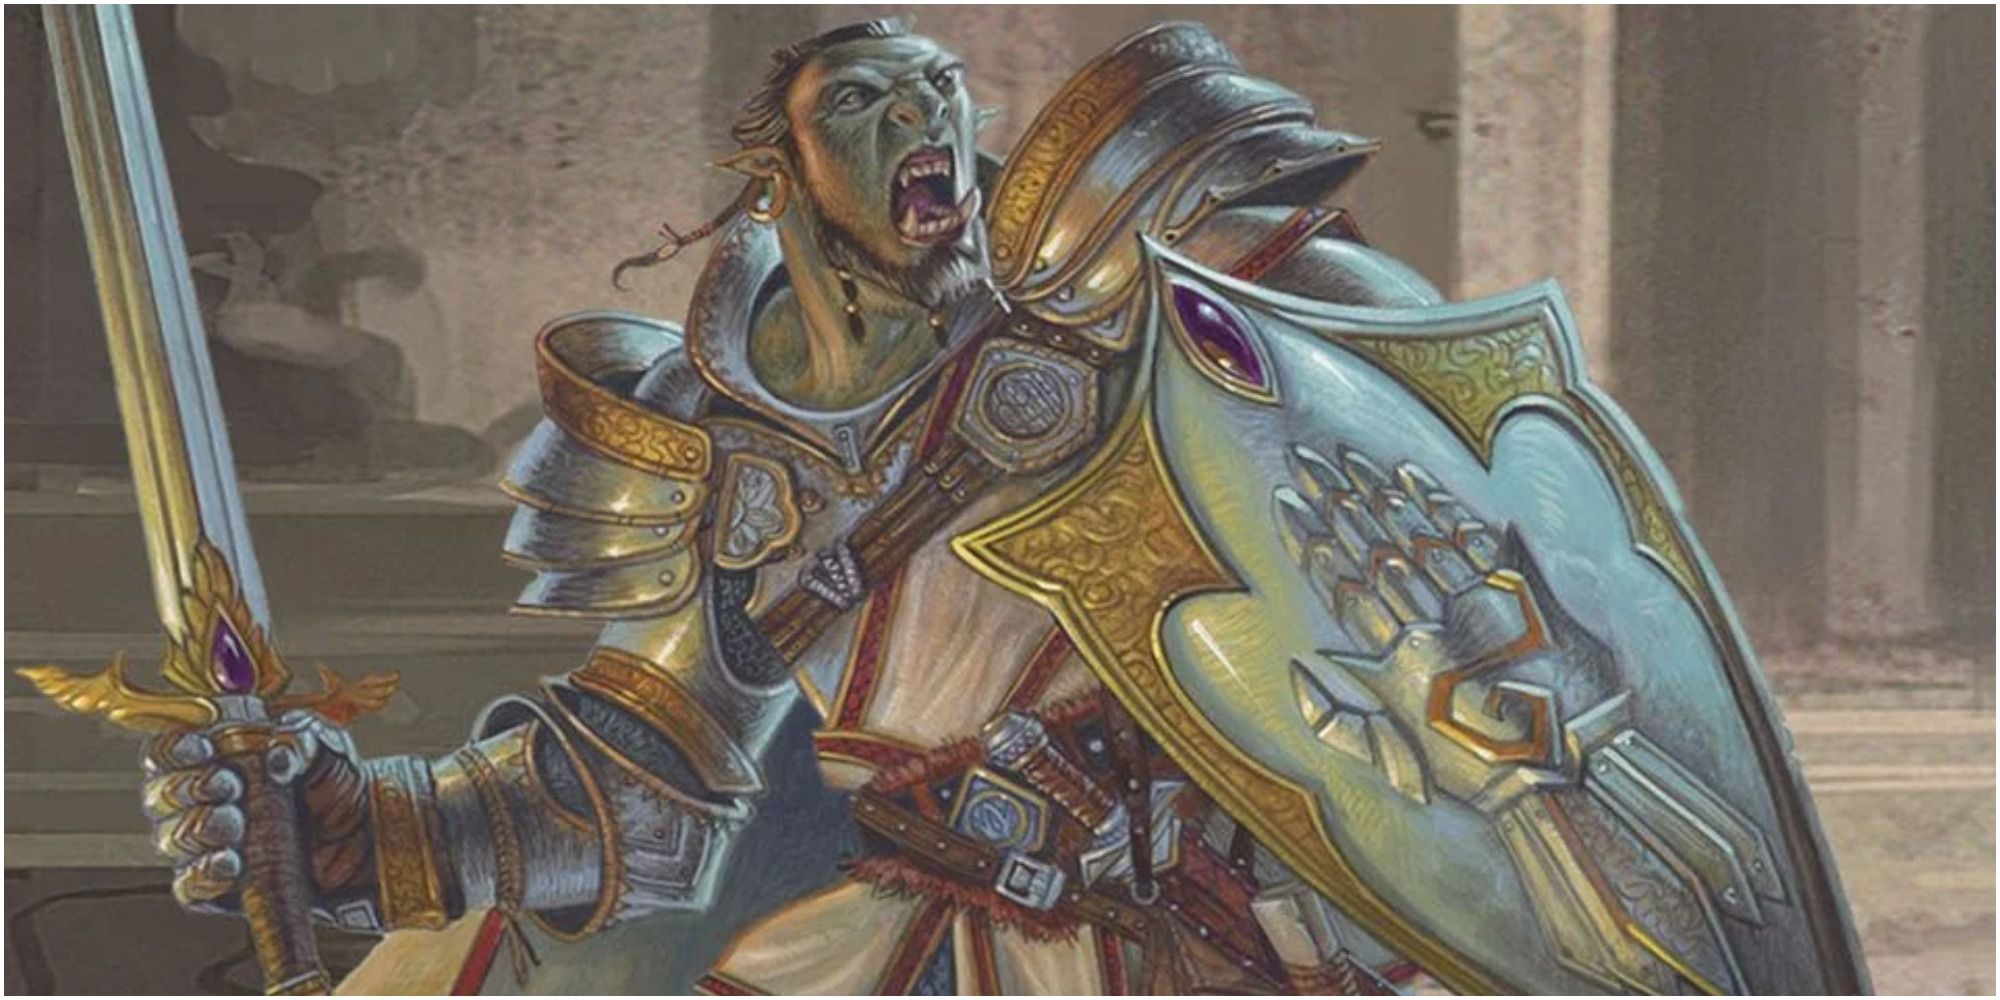 Dungeons & Dragon half orc paladin holding large sword with a shield while letting out a battle cry